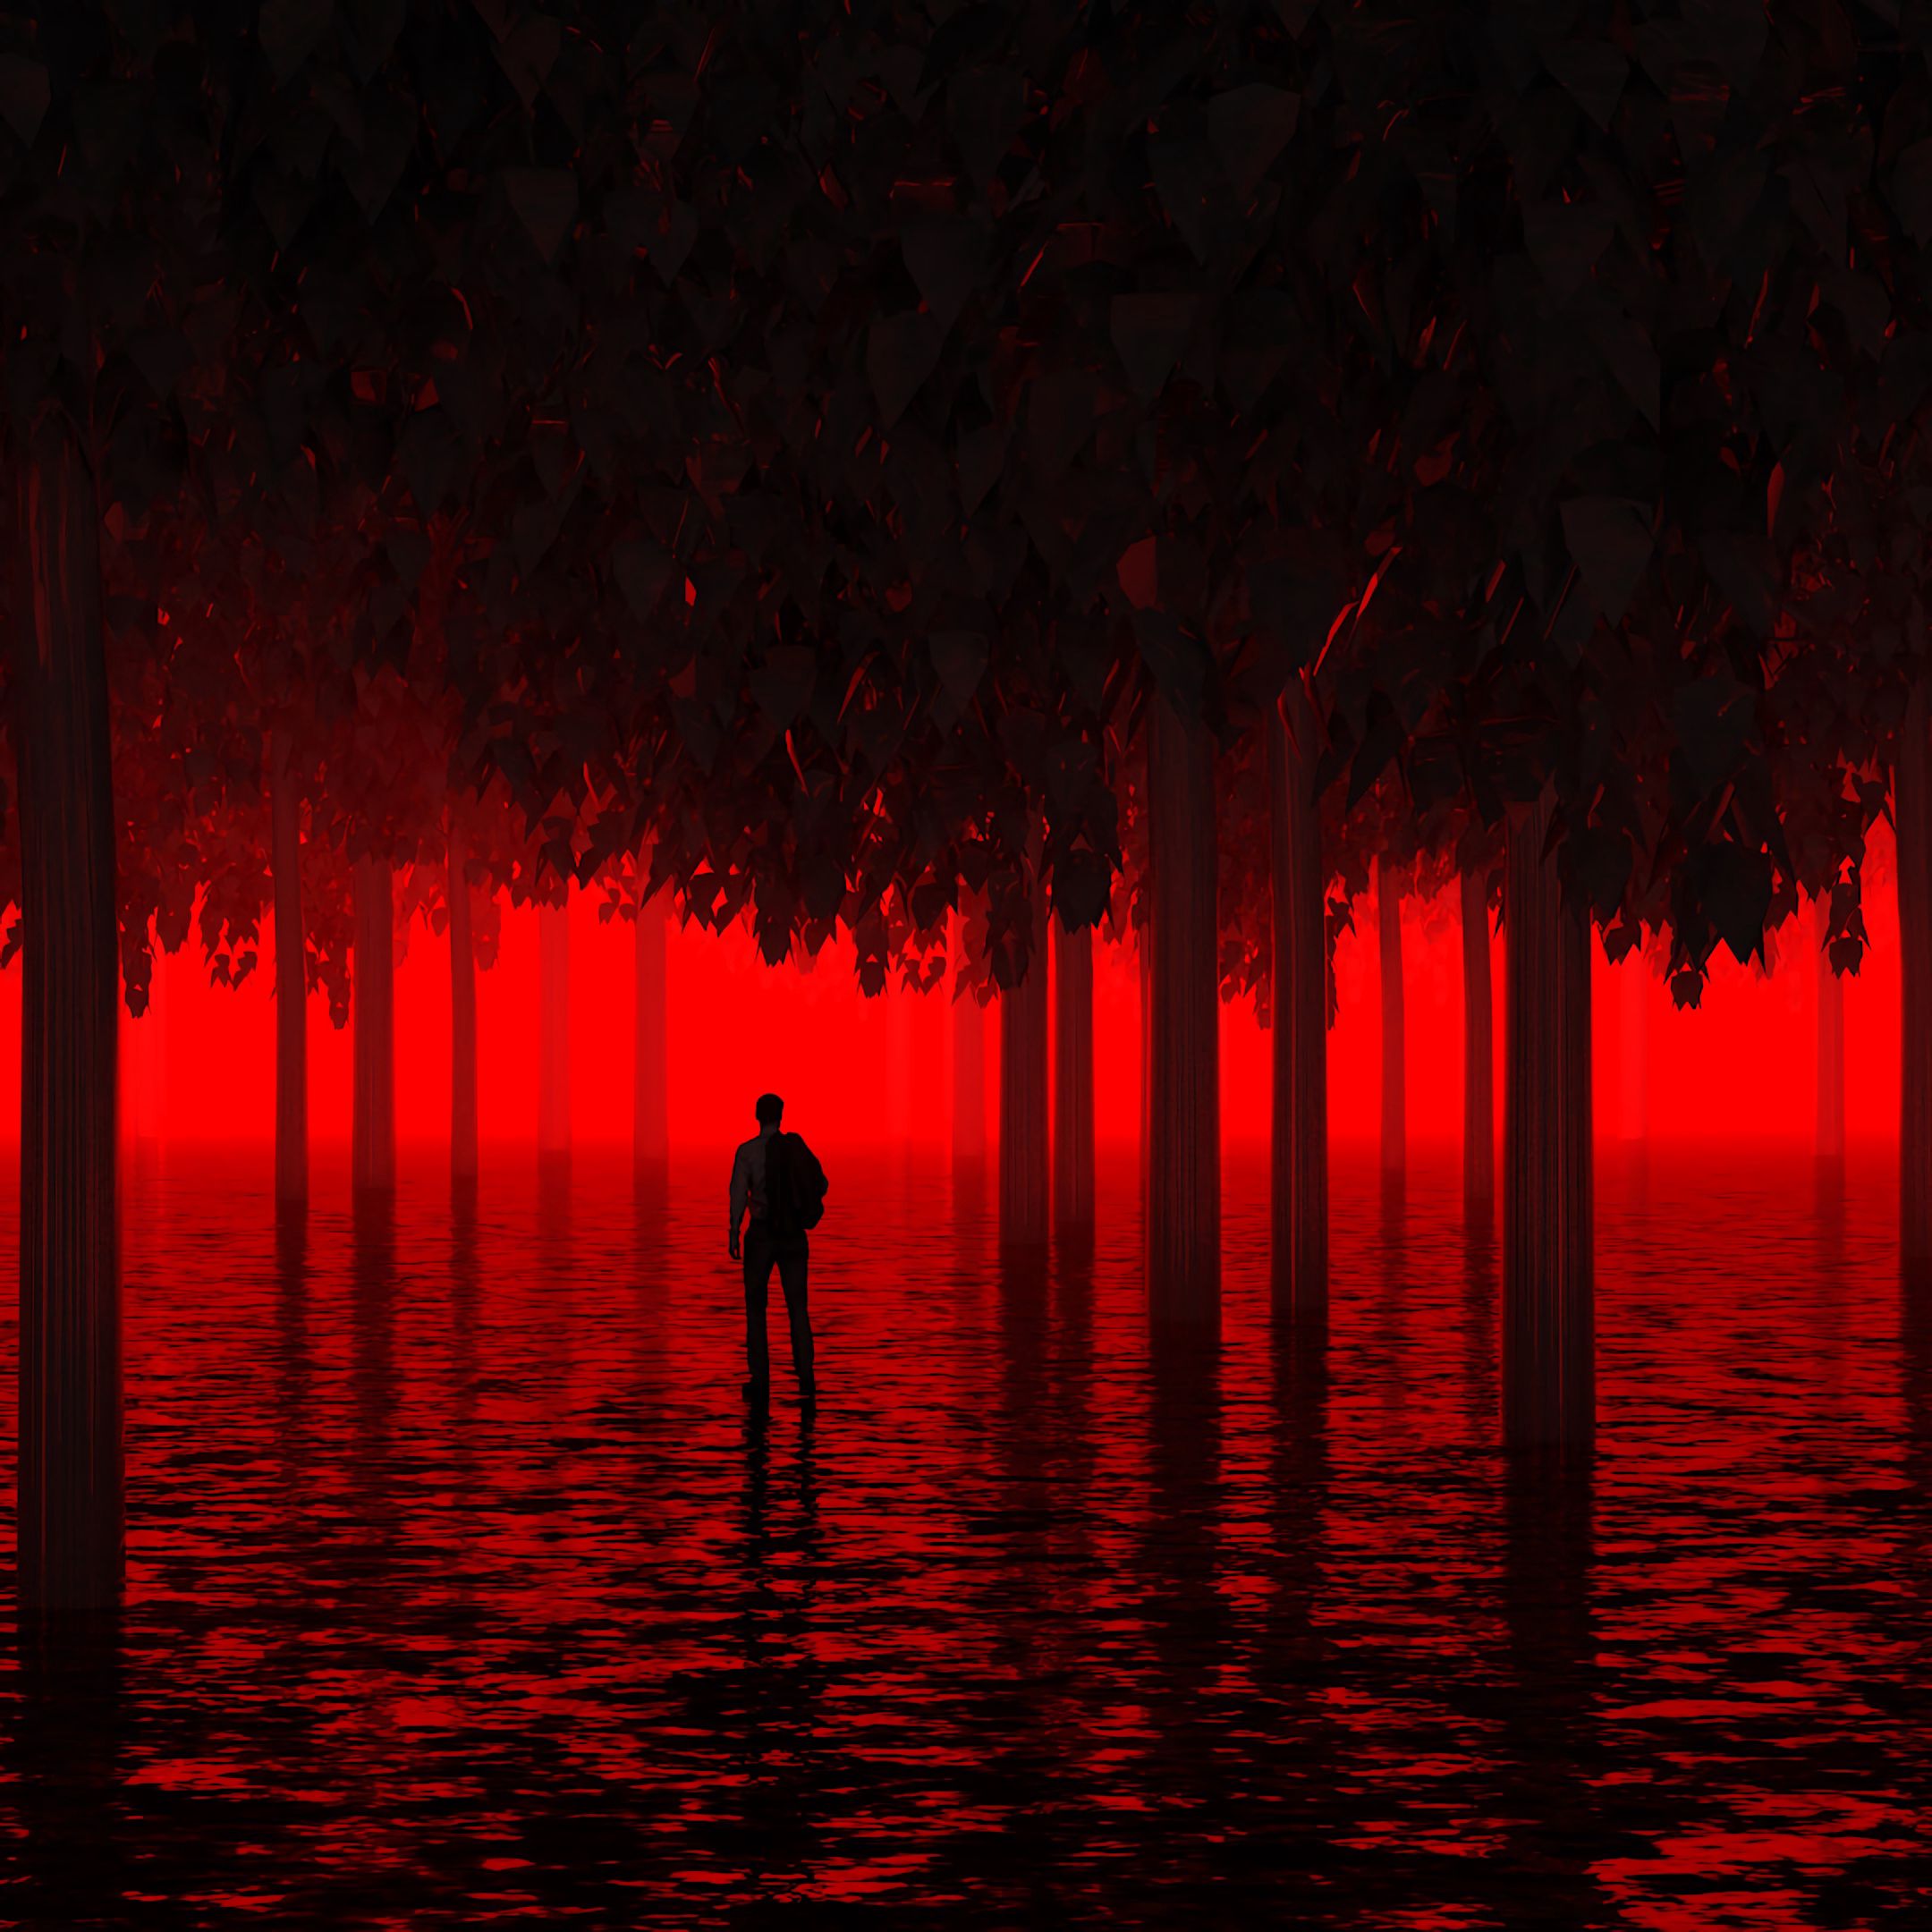 flooded, submerged, neon, trees home screen for smartphone